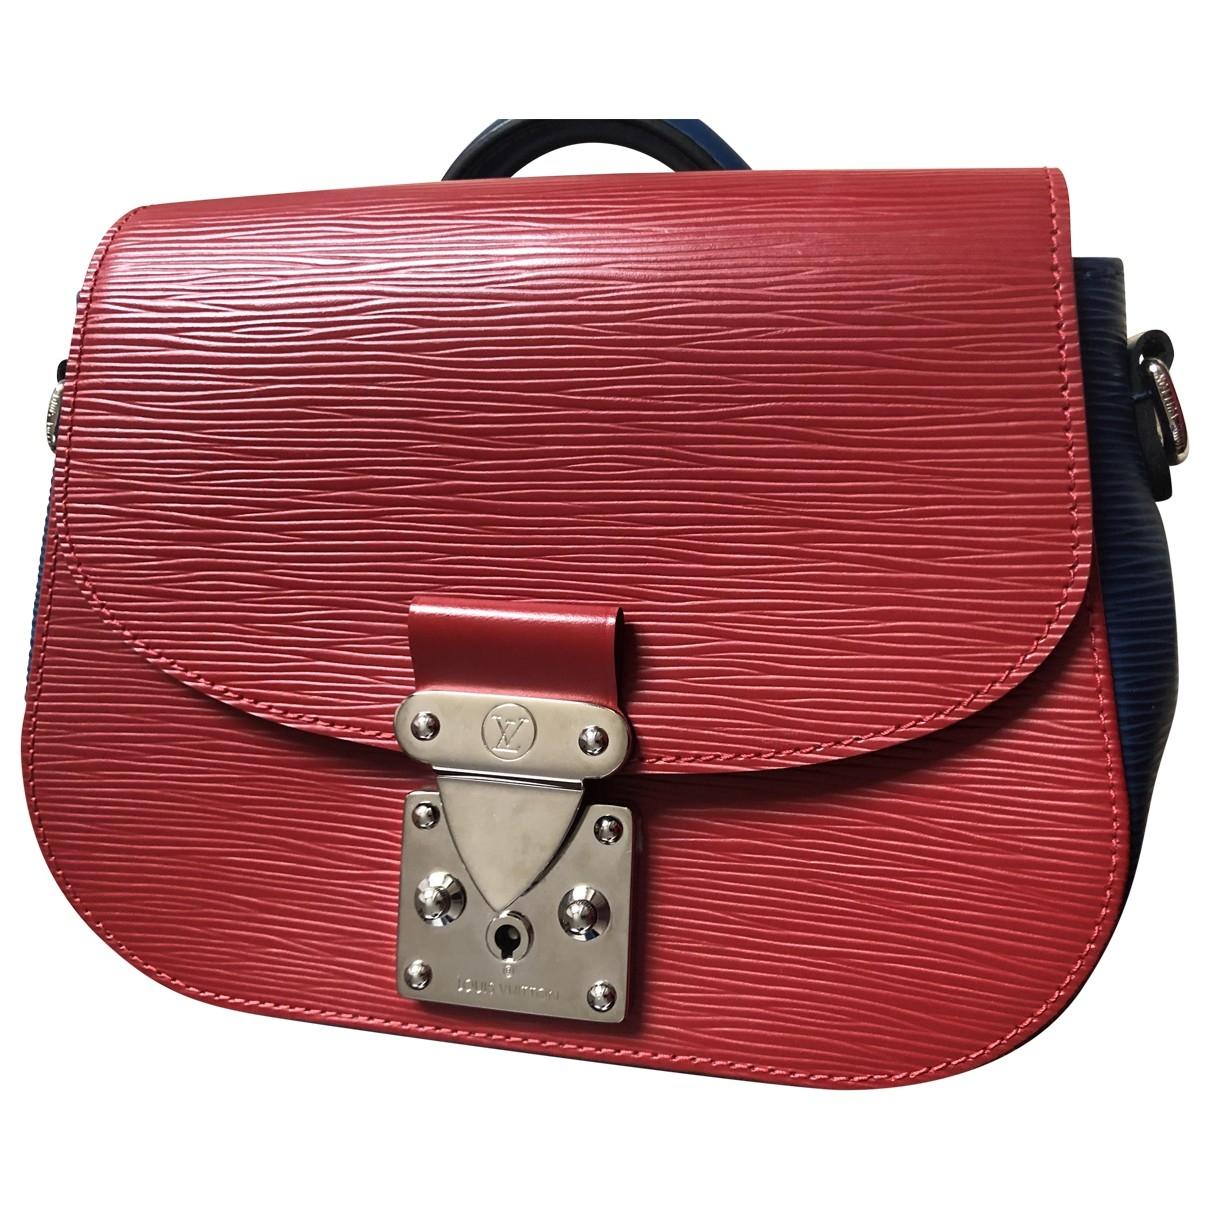 Louis Vuitton Eden Leather Mini Bag in Red - Lyst